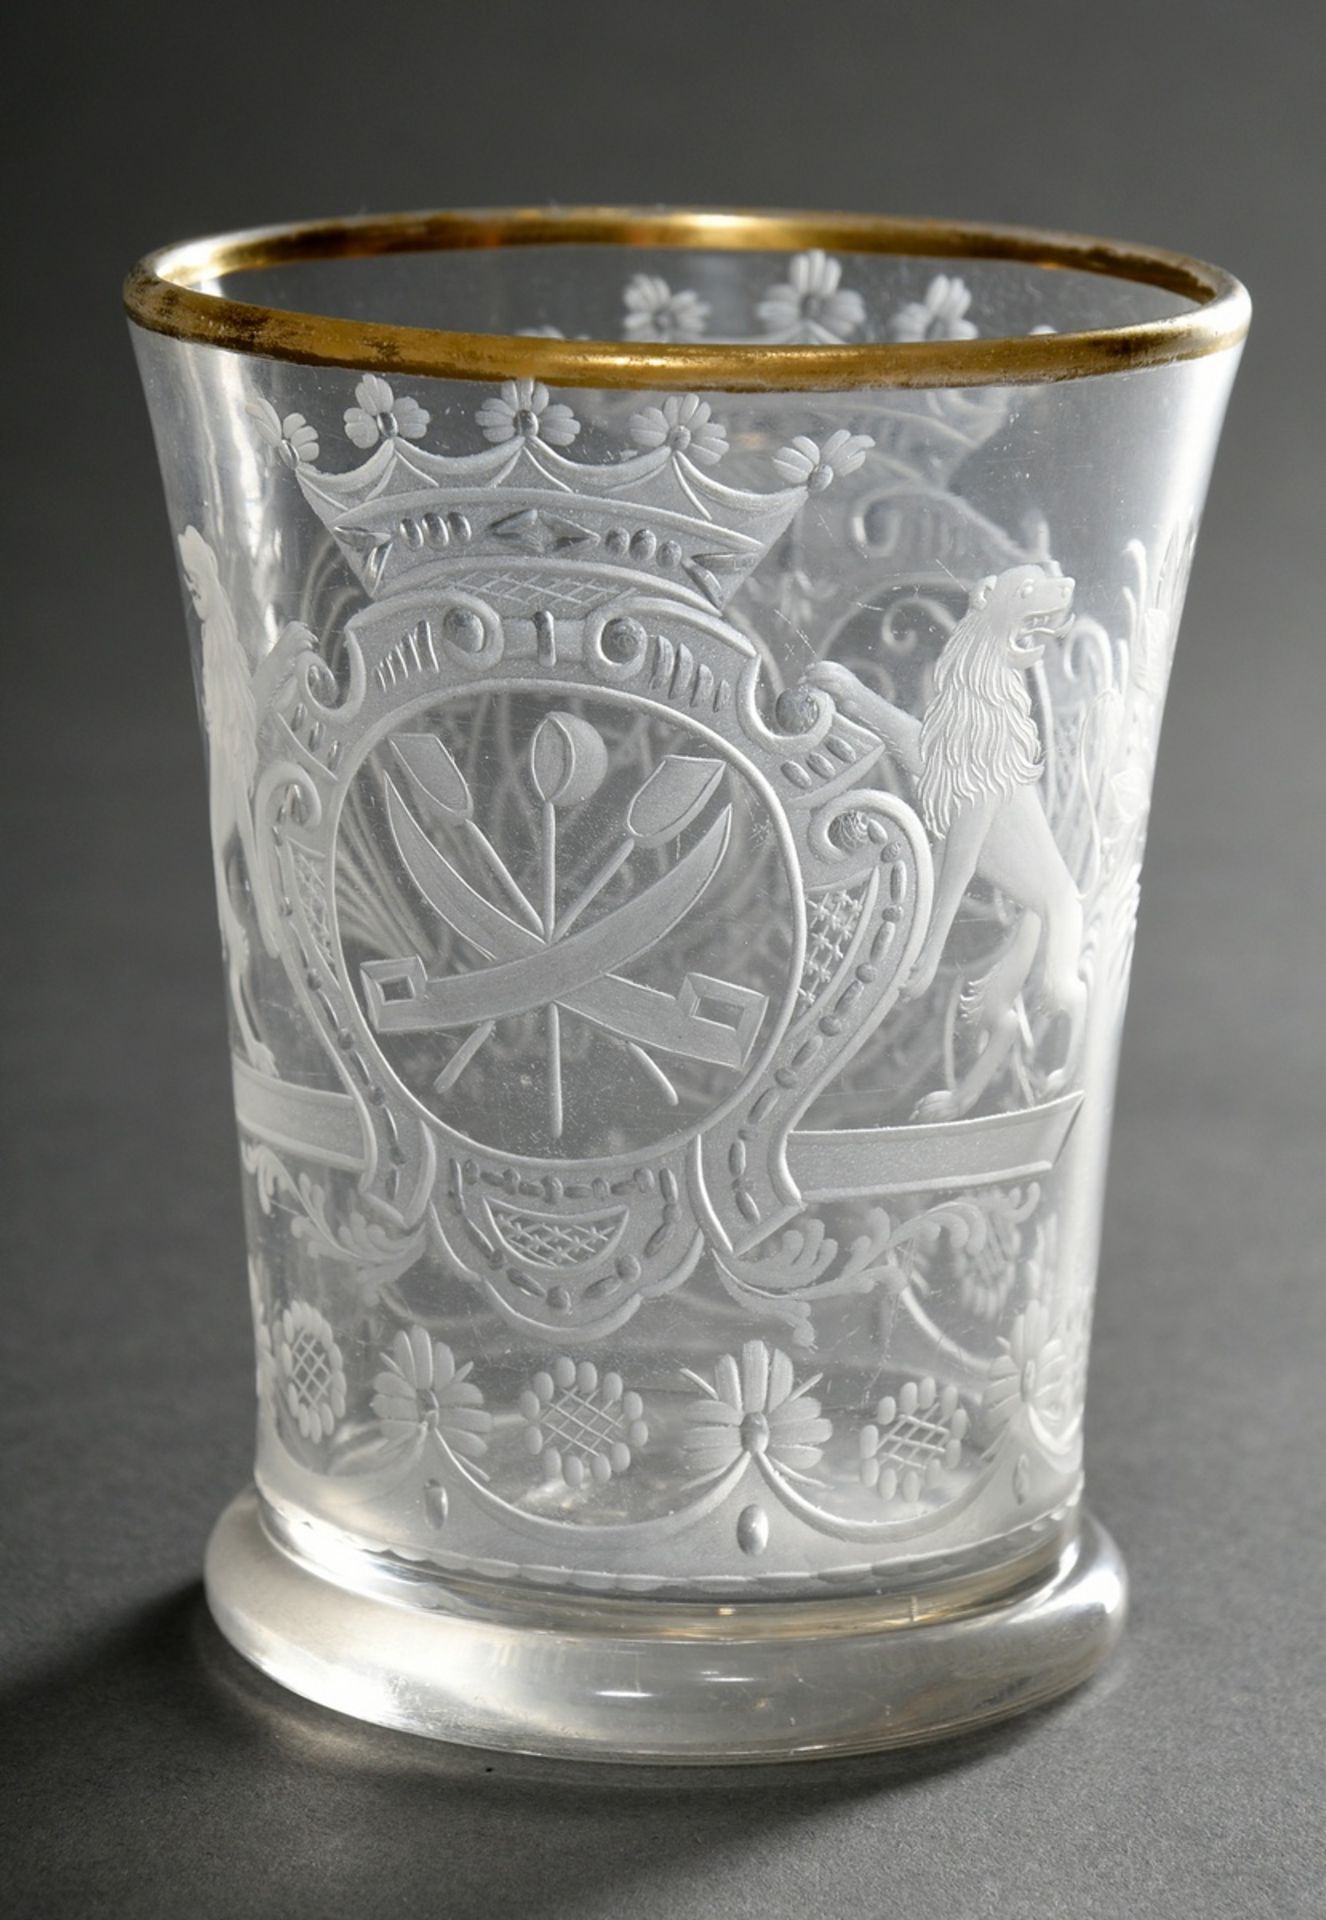 Beaker in baroque style with ligatured double monogram "HPW" and "CBW" in crowned cartouche as well